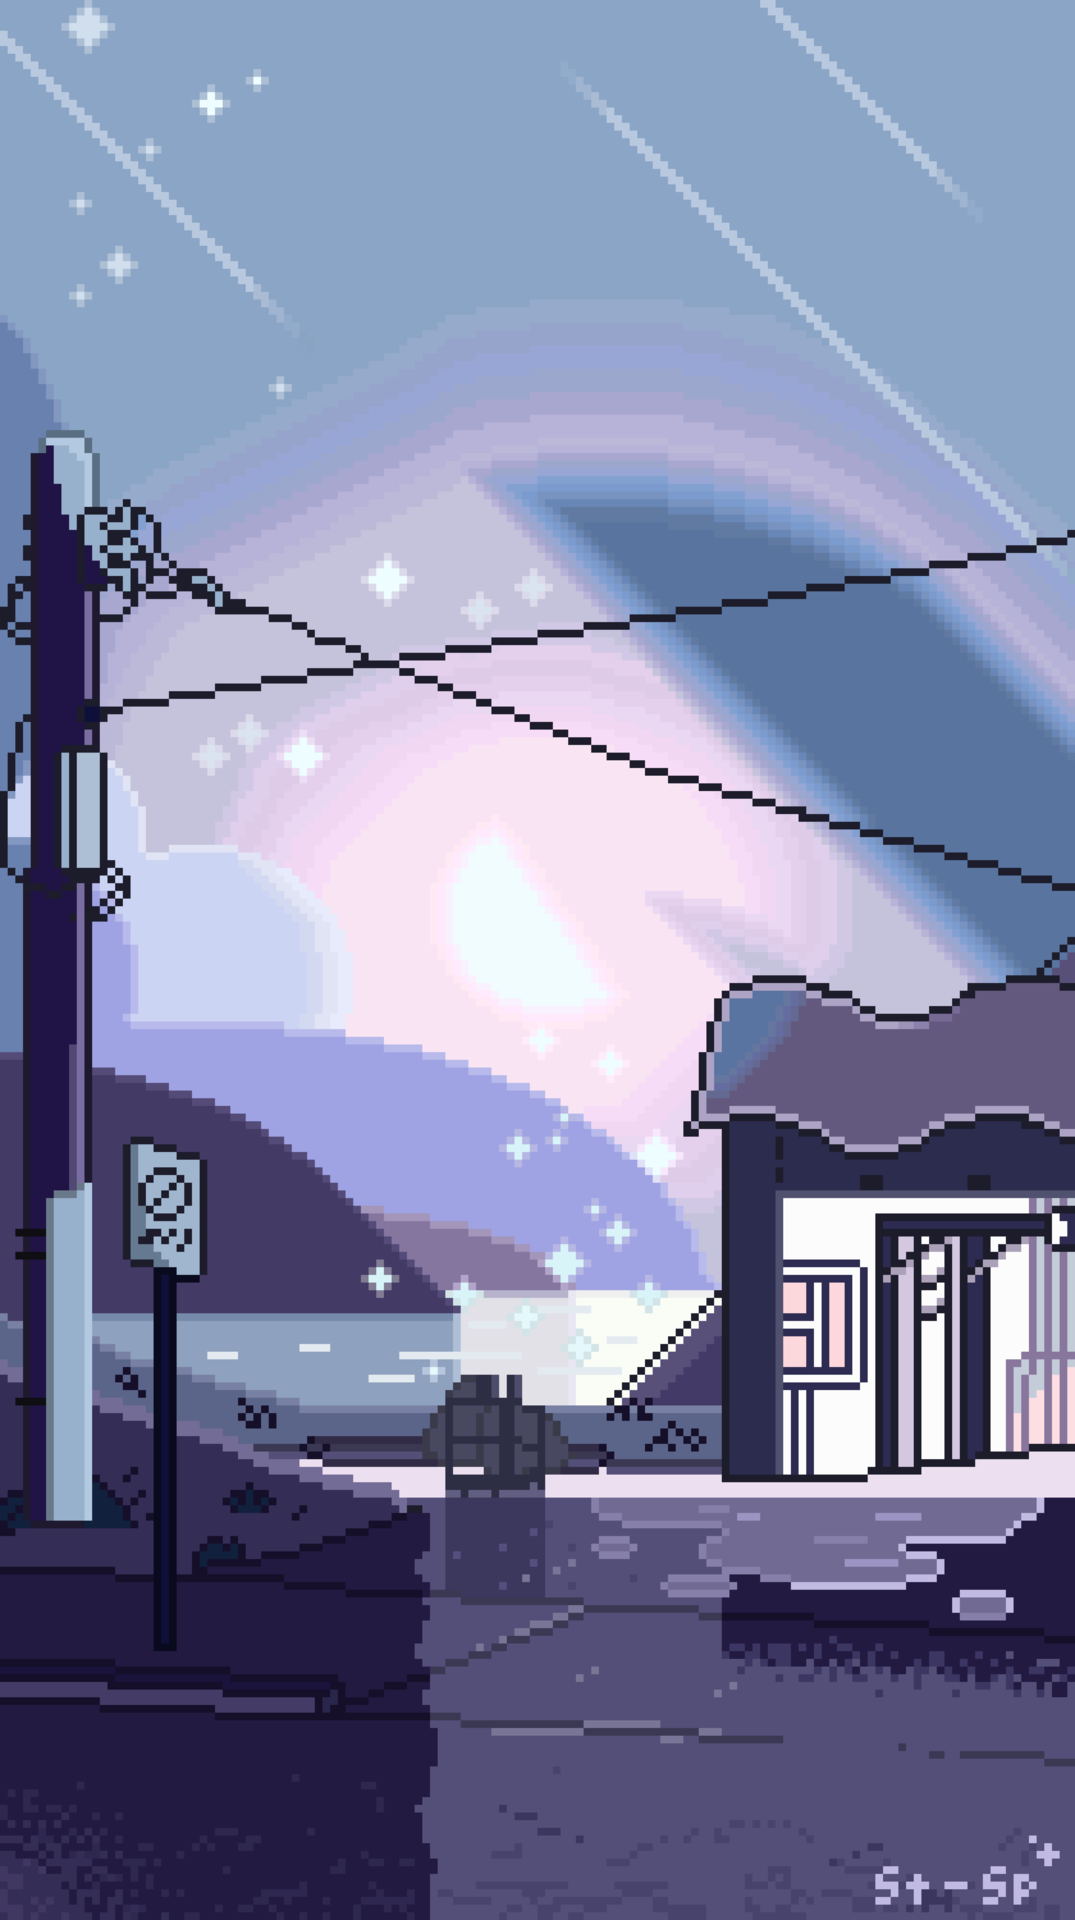 Some high quality iPhone wallpaper of Steven Universe scenery I’ve made in my pixel art style! Free to use. Do not delete caption or repost.